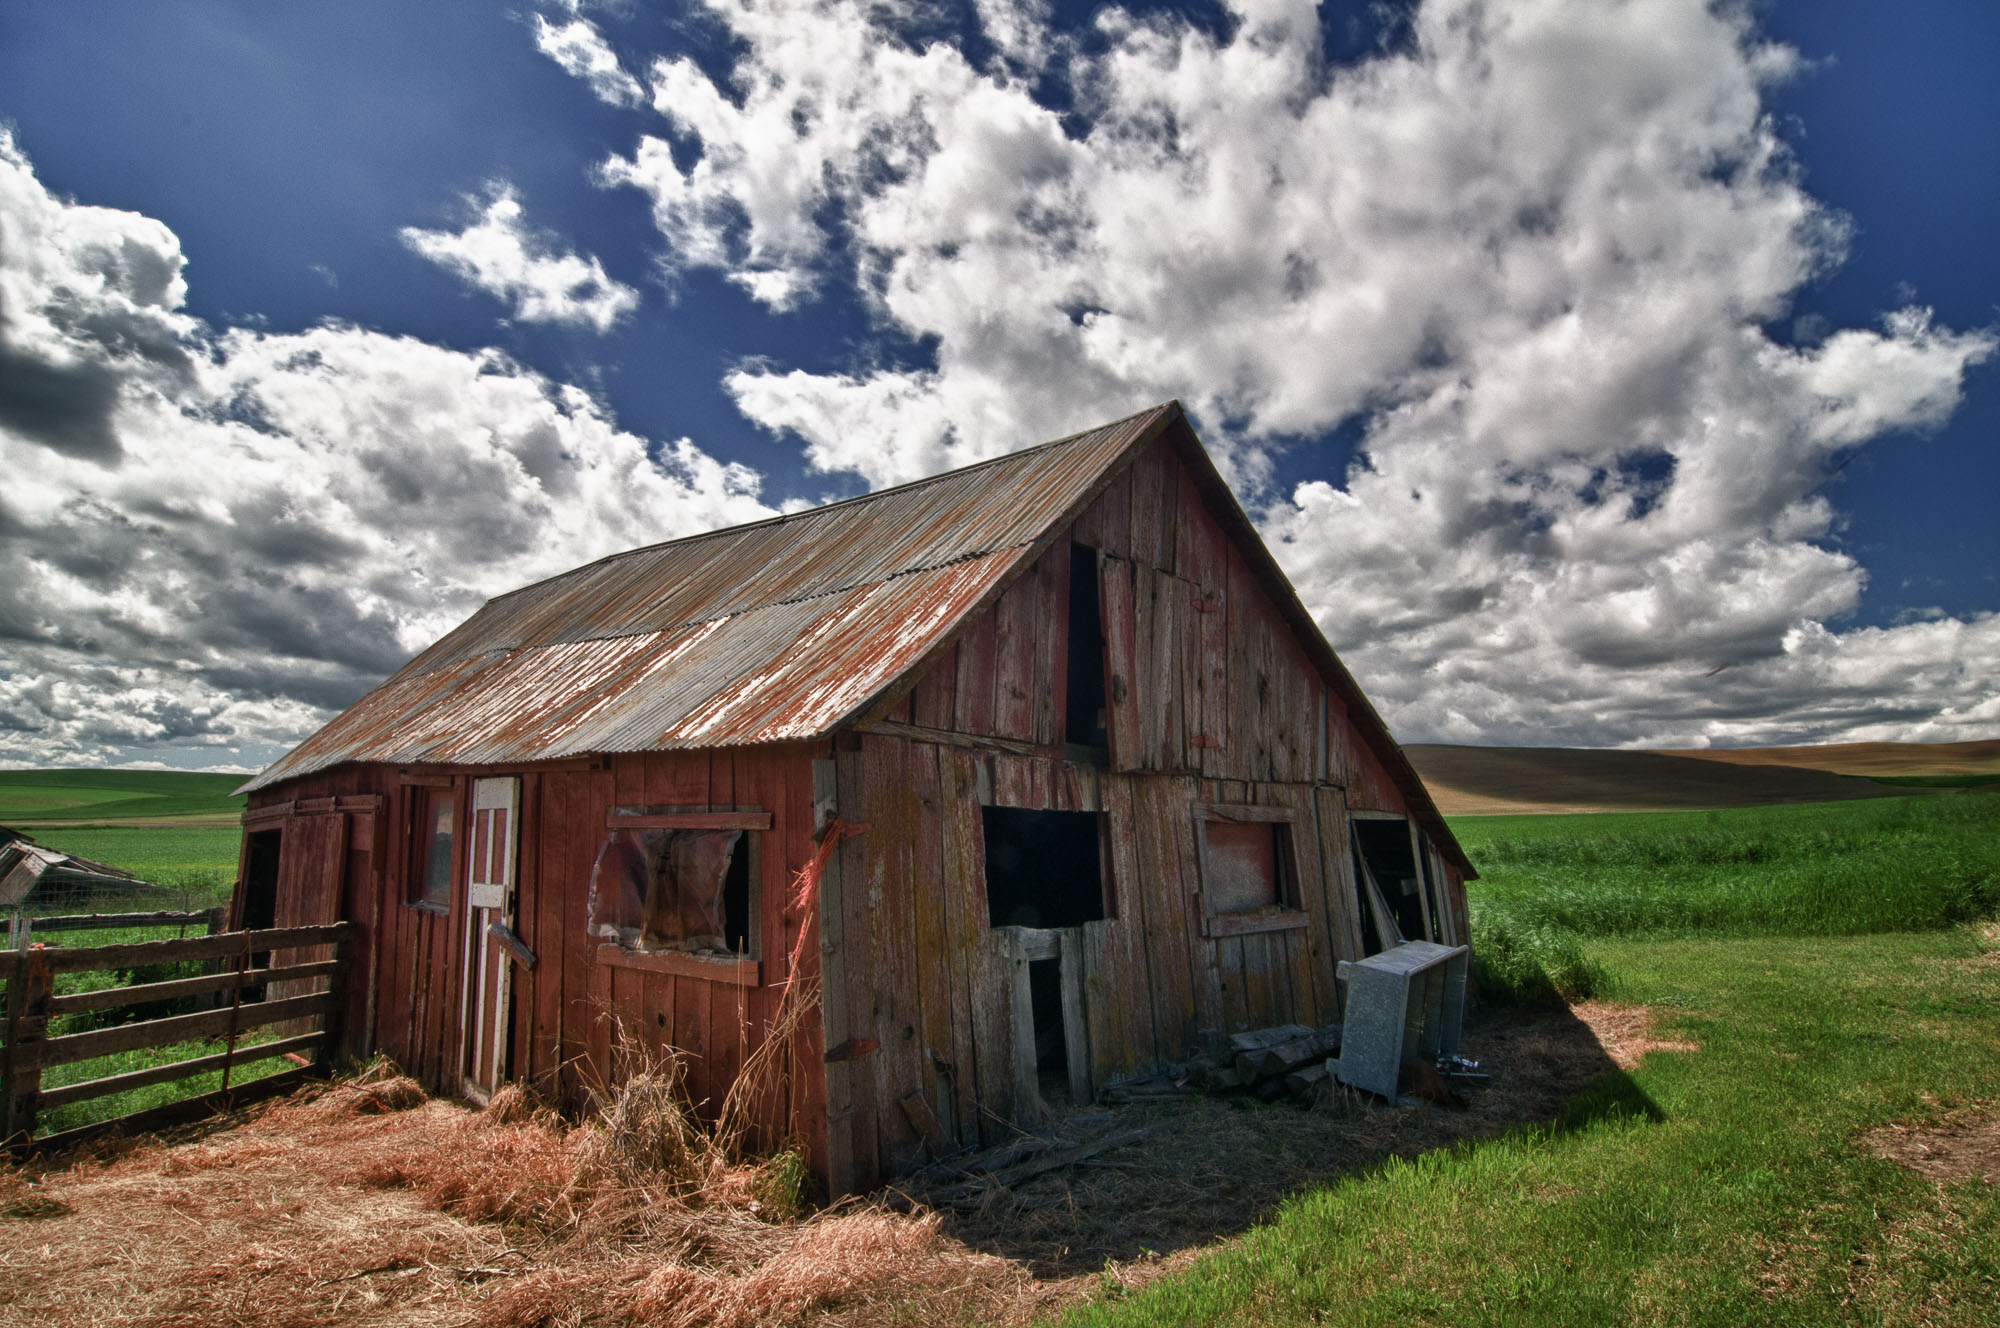 Barbee_110614_3_7430_HDR |  Cow barn. HDR1